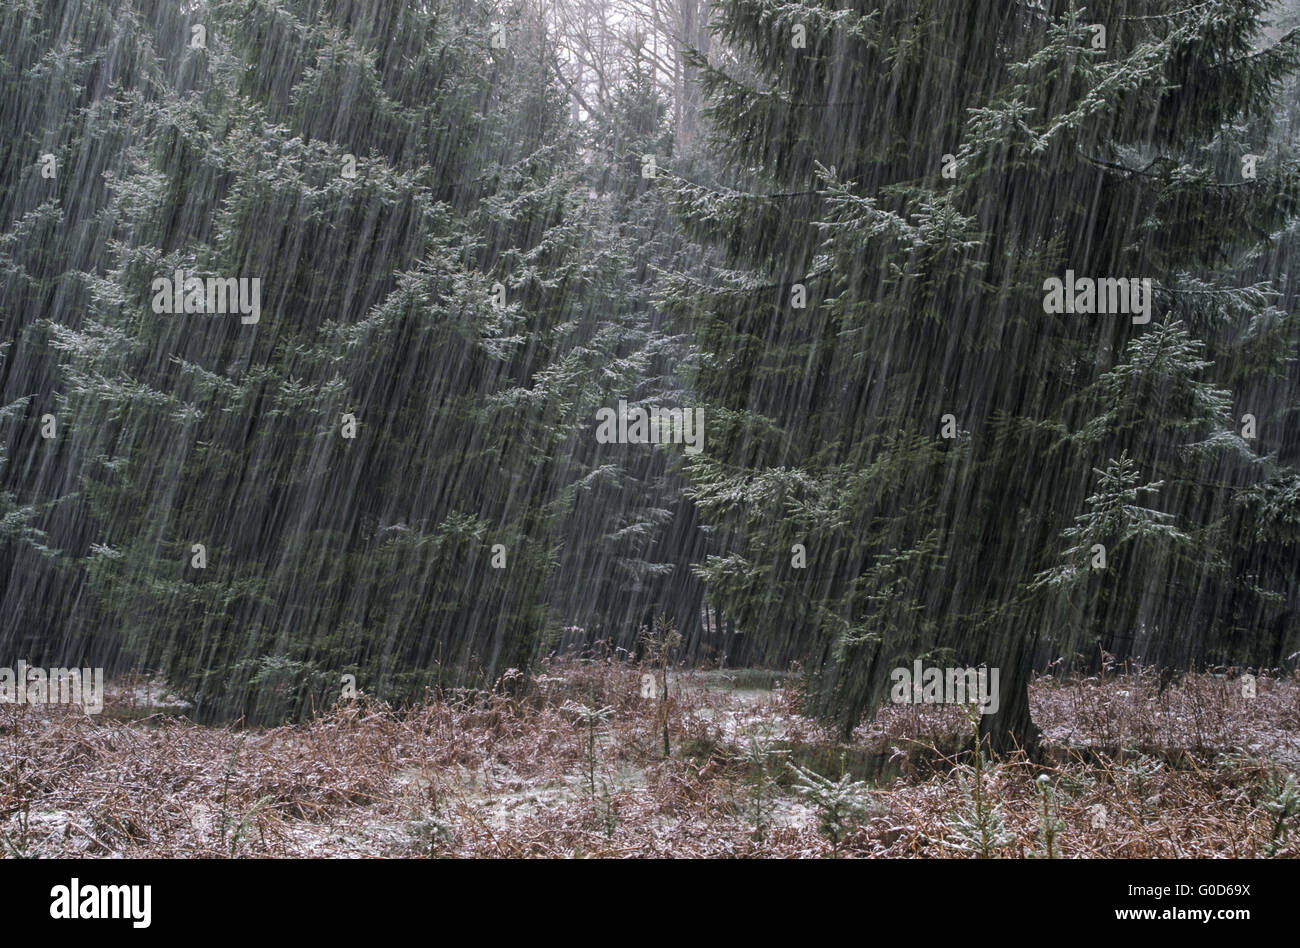 Snowfall in a spruce wood Stock Photo